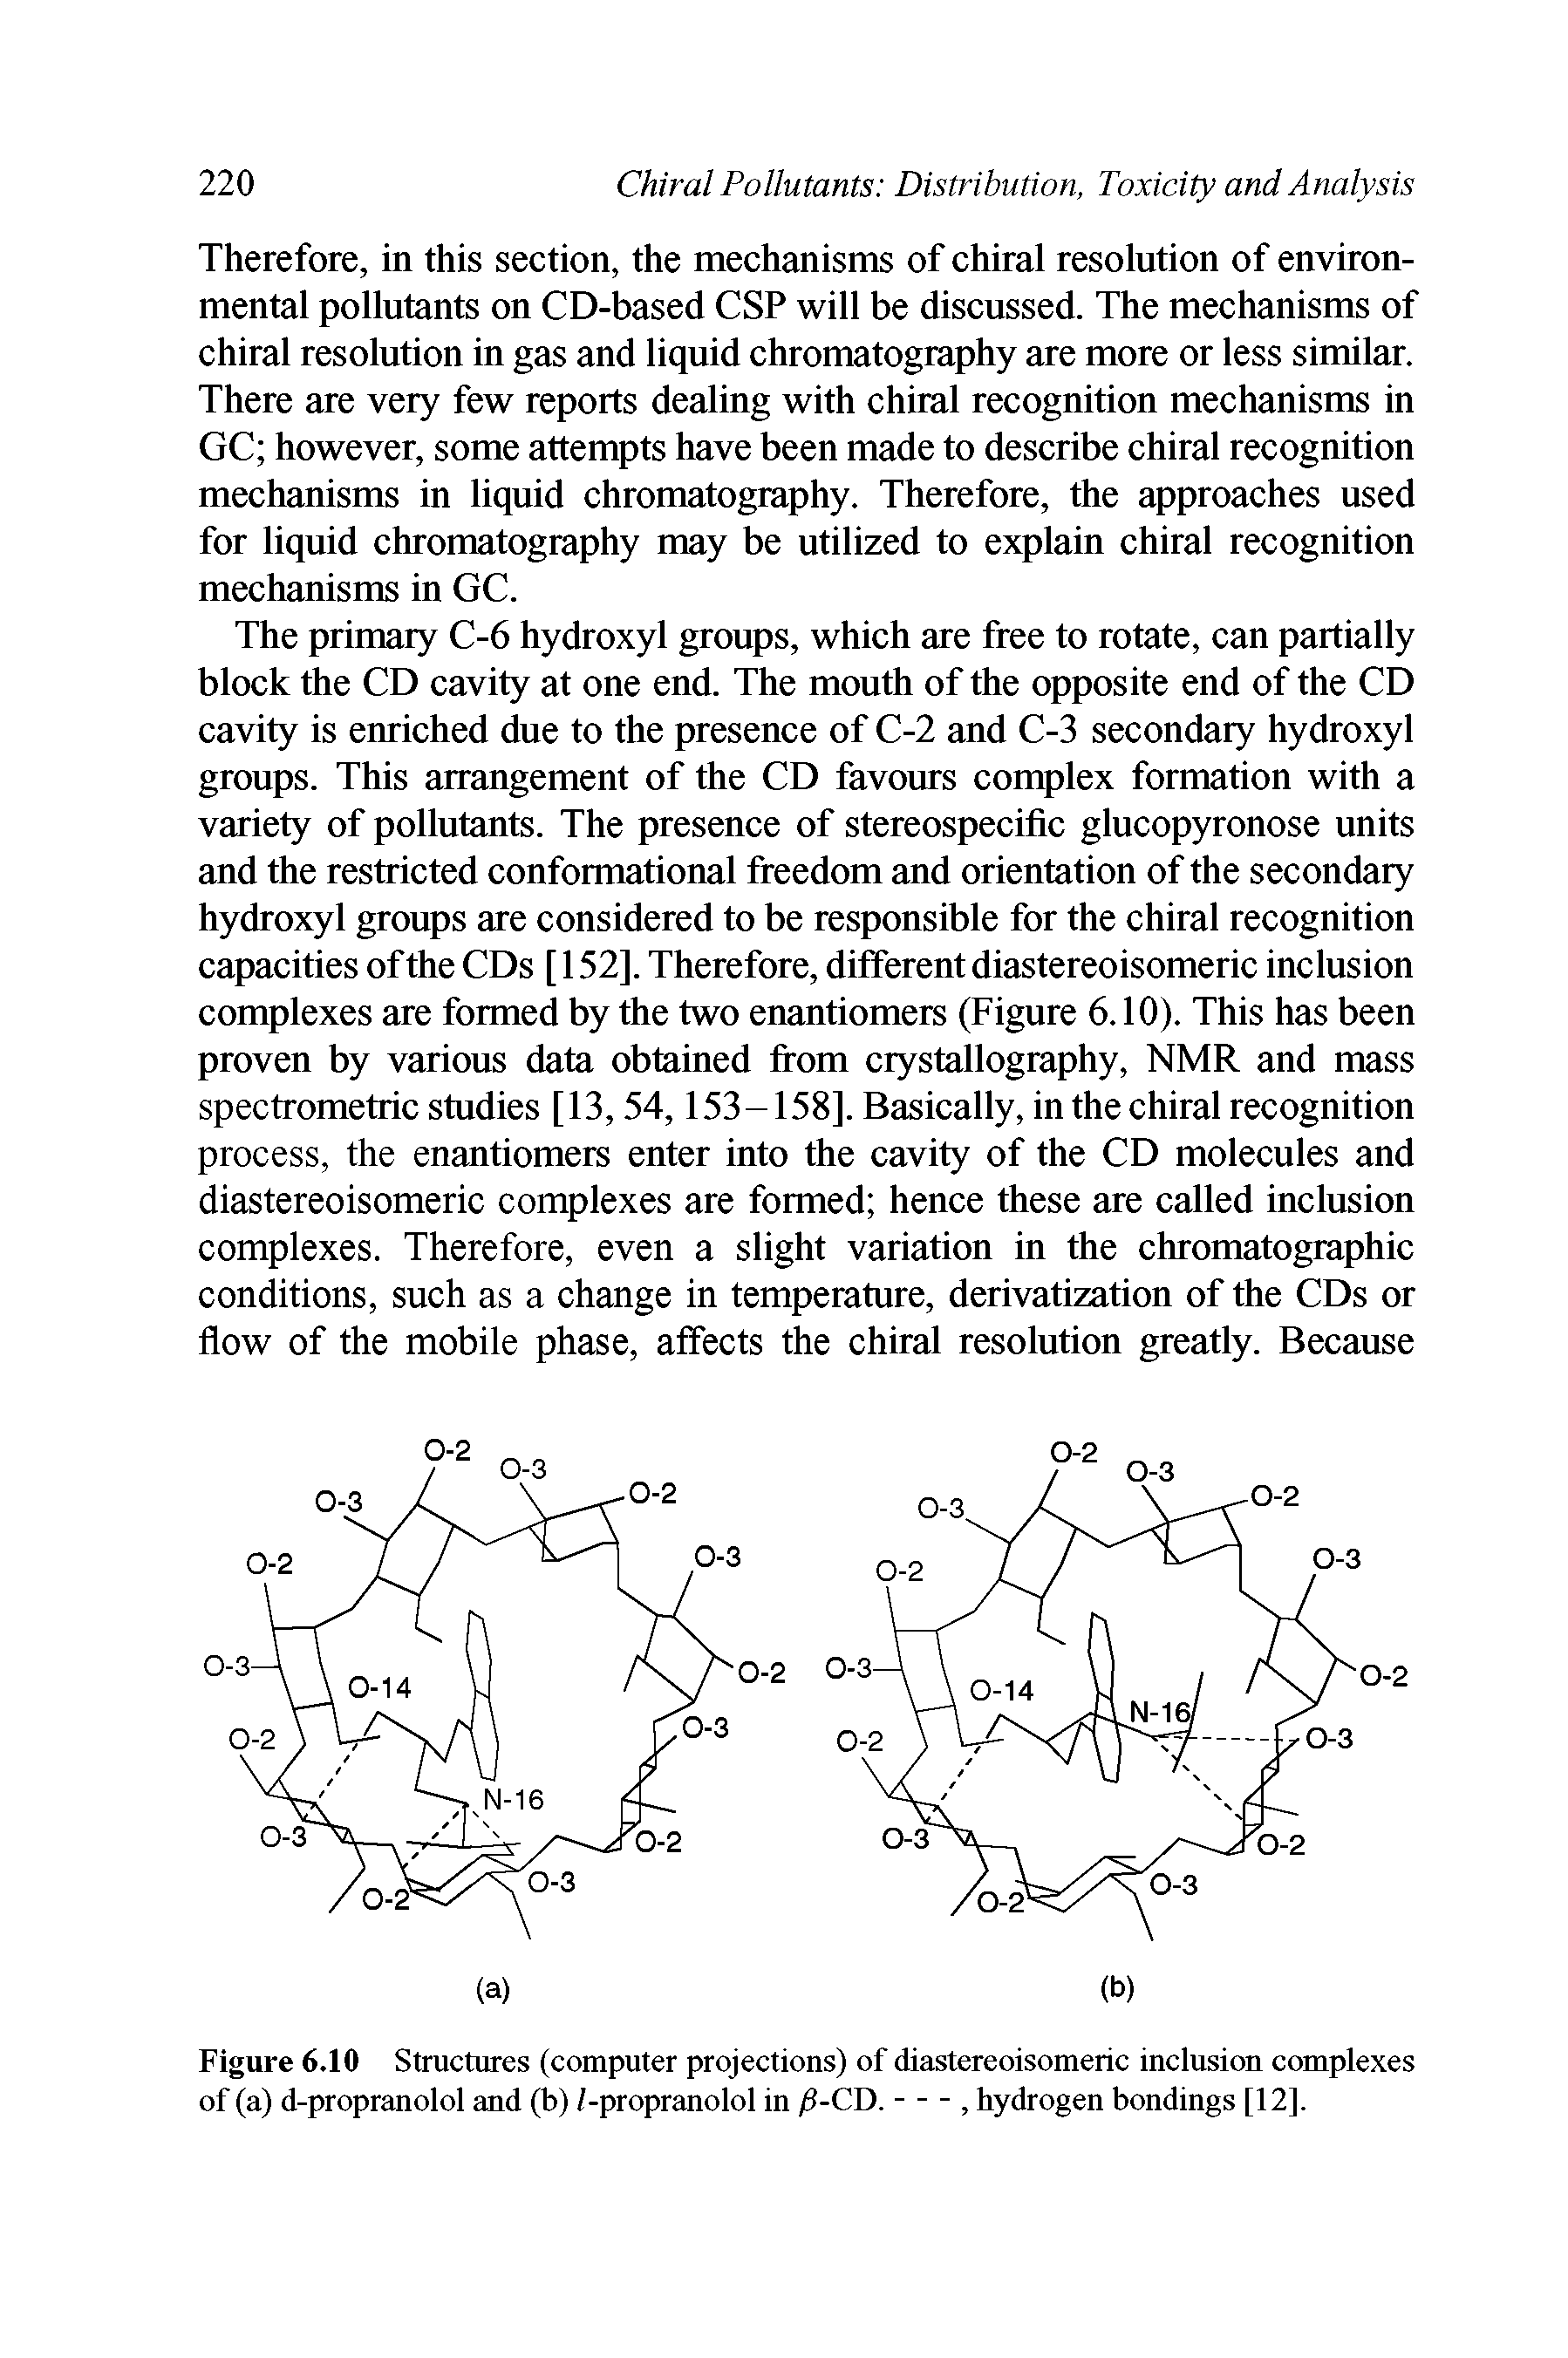 Figure 6.10 Structures (computer projections) of diastereoisomeric inclusion complexes of (a) d-propranolol and (b) /-propranolol in fi-CD.--, hydrogen bondings [12],...